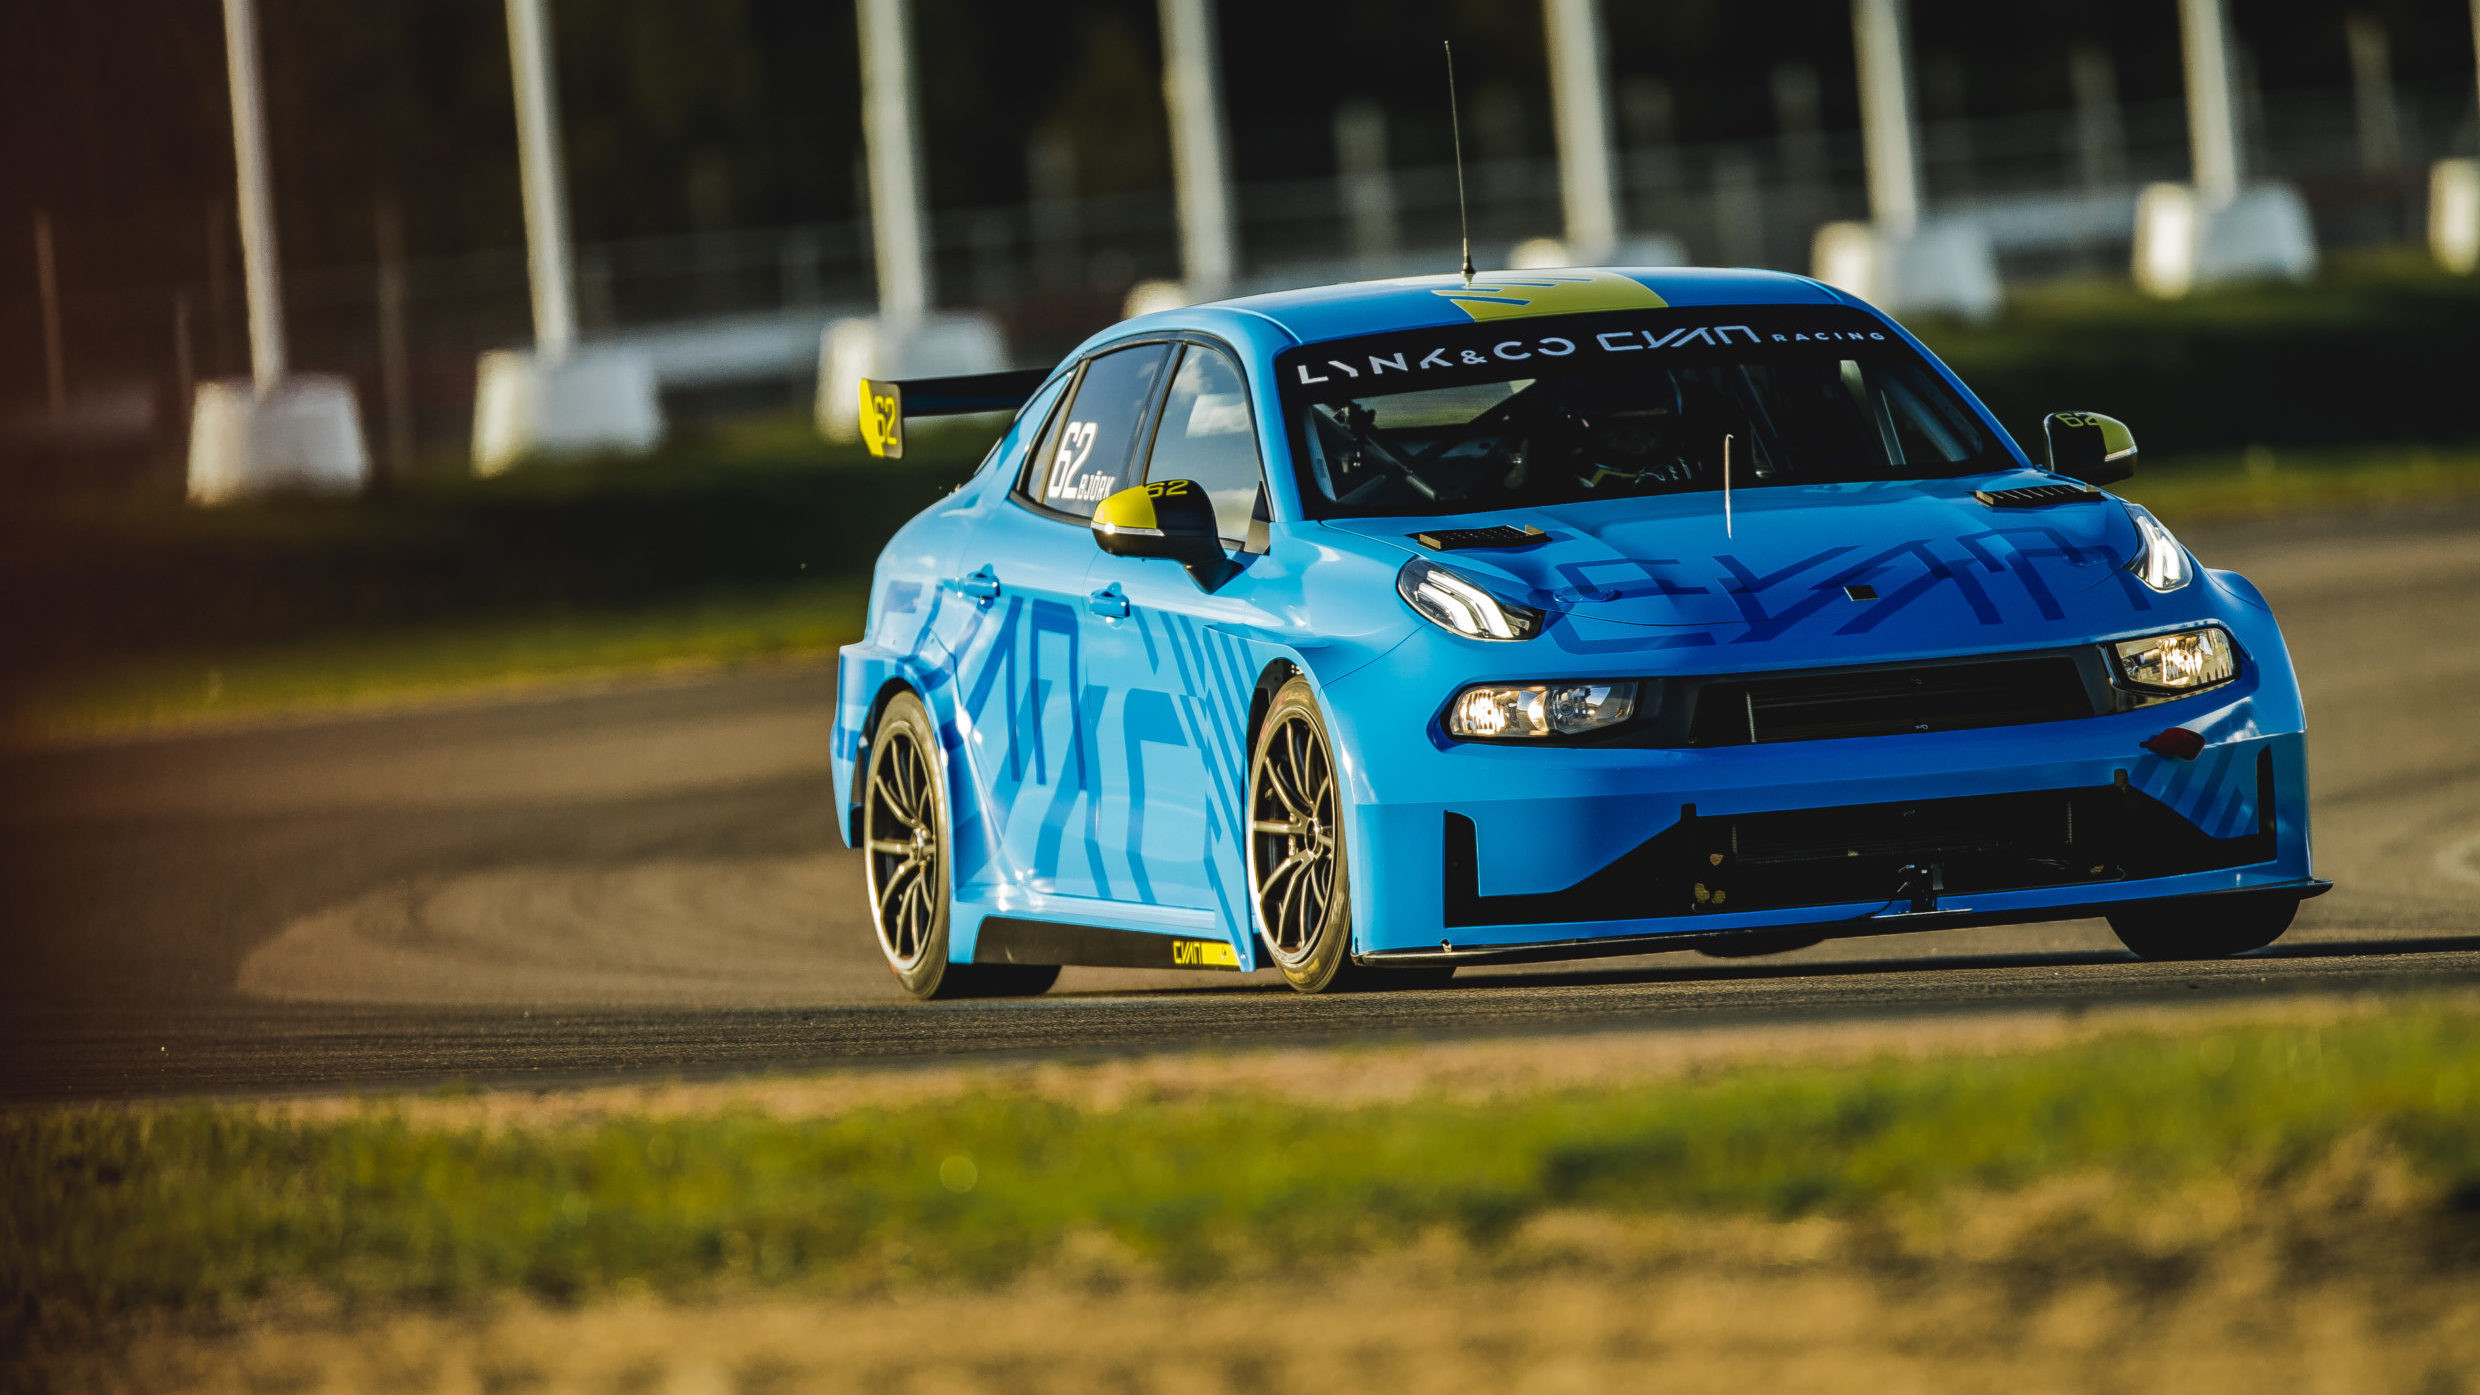 Thed Björk and Yvan Muller commence testing with the new Lynk & Co 03 TCR ...2480 x 1395